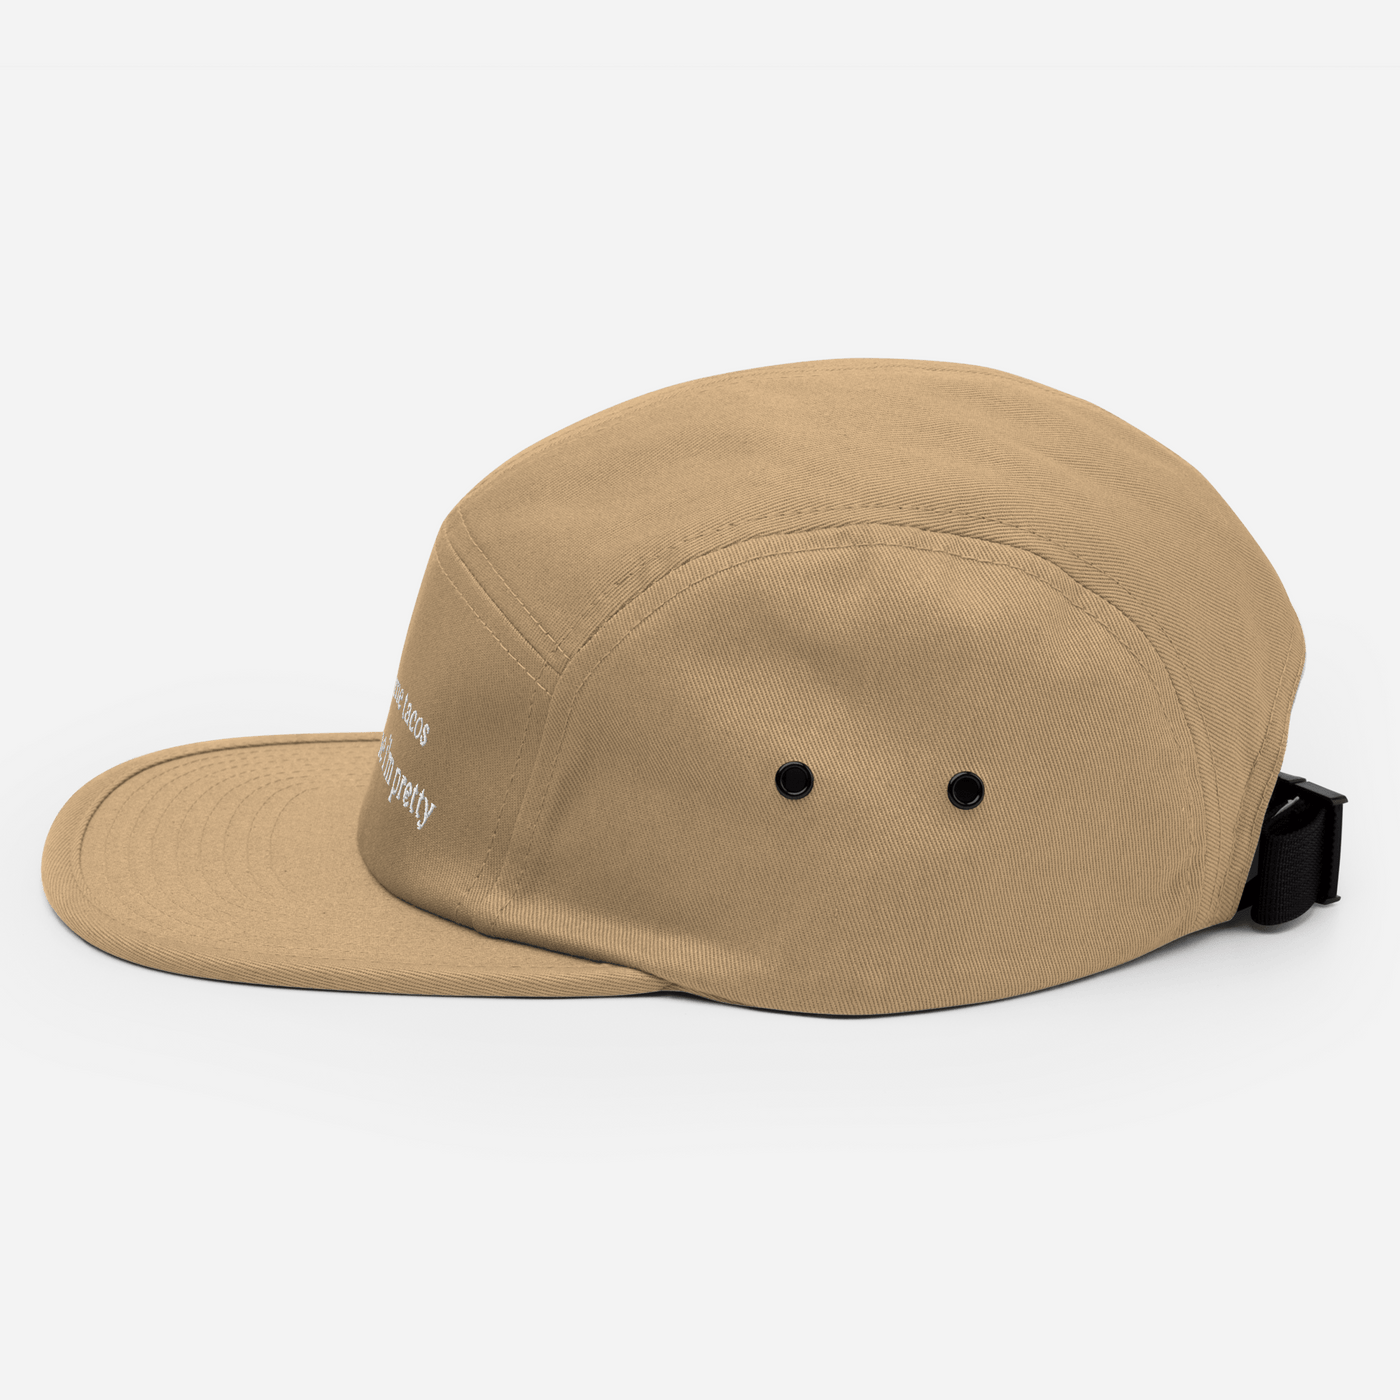 Feed me tacos Five Panel Cap - Khaki - - Just Another Cap Store